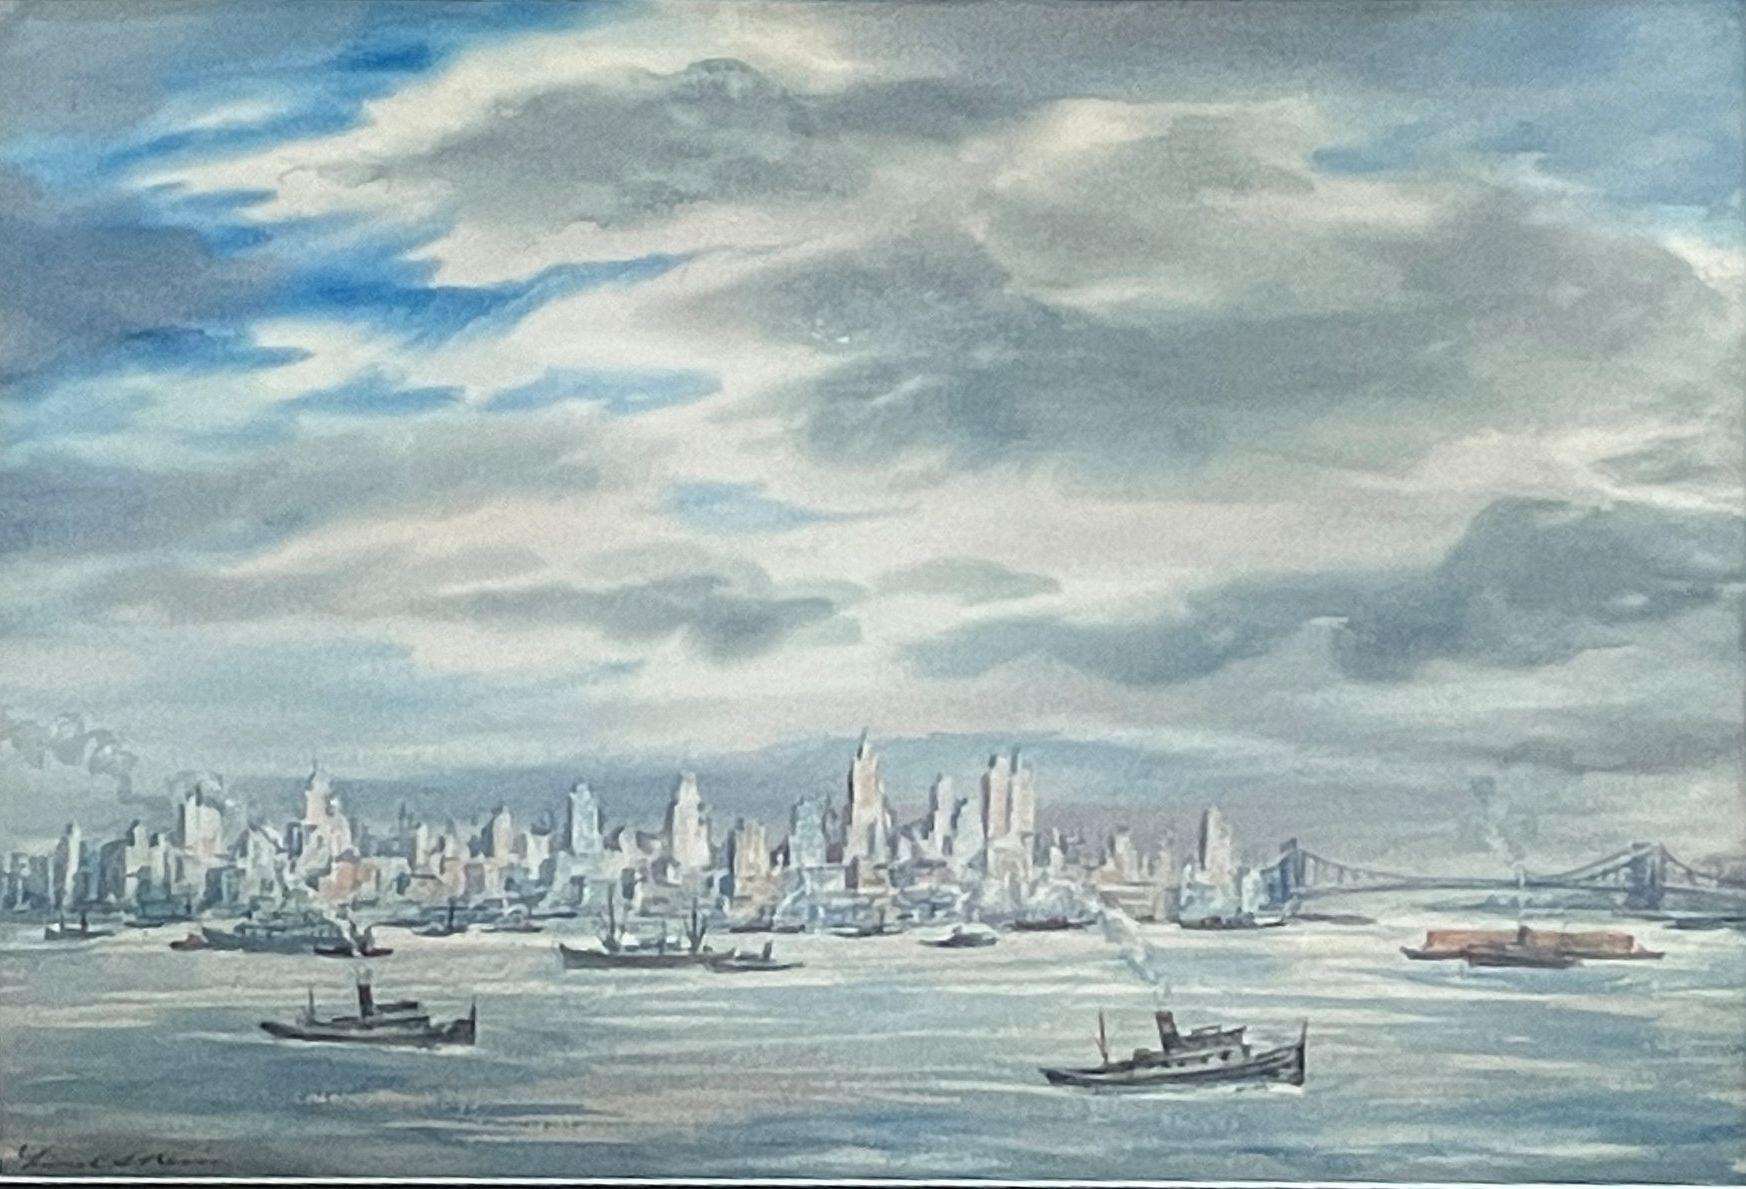 "New York City Skyline View from the East River, " Lionel Reiss, Jewish Artist